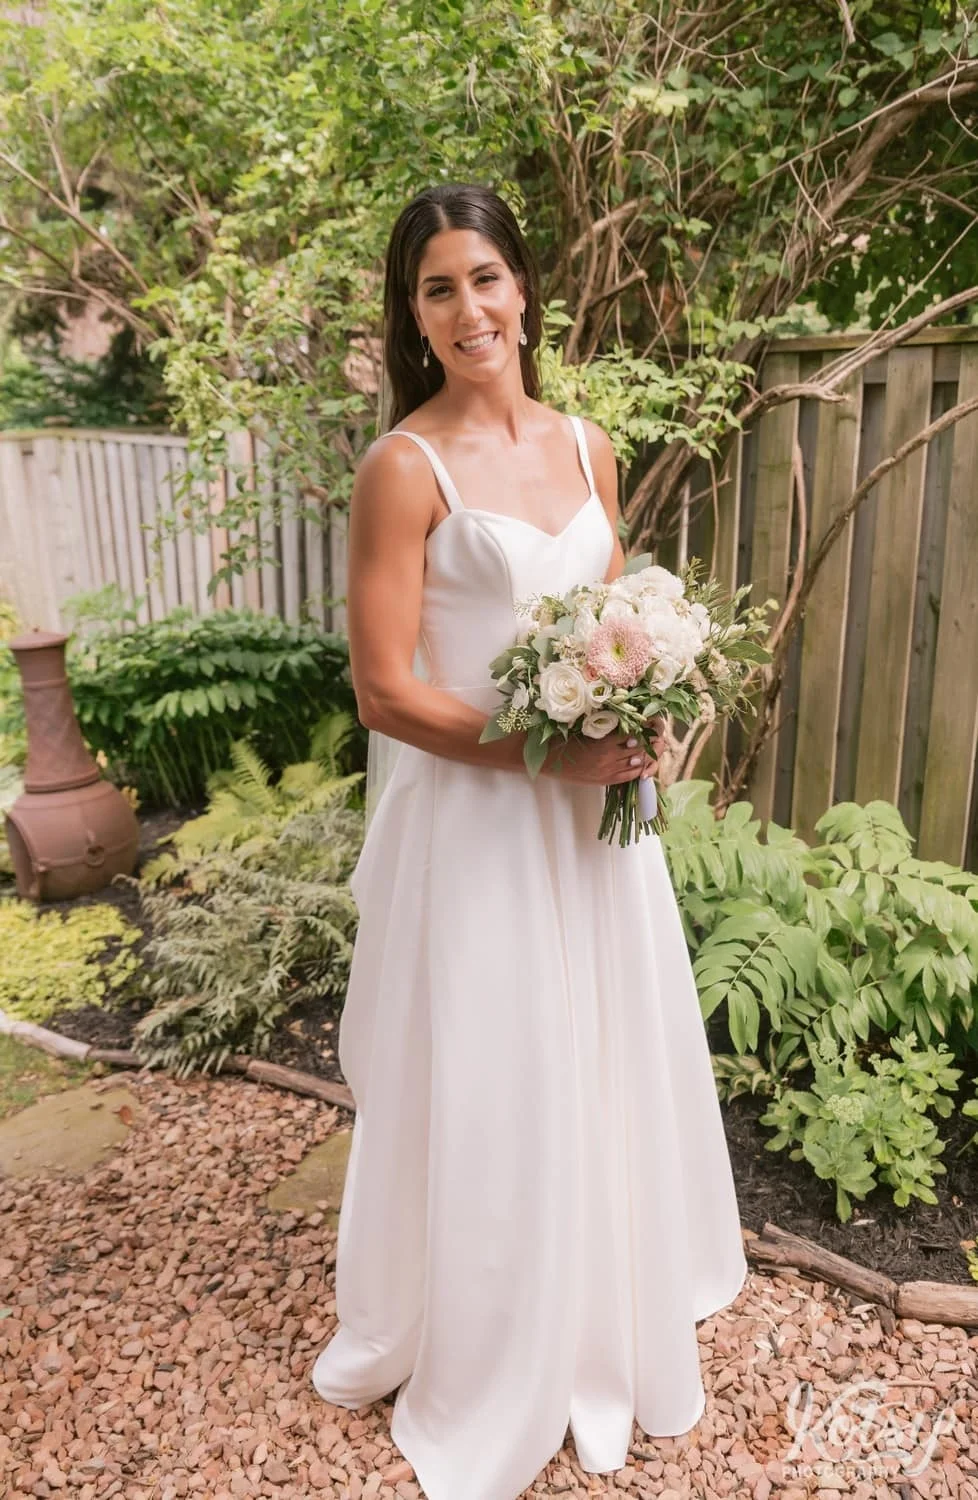 A bride poses for a solo portrait while wearing a white wedding gown and holding a bouquet of flowers.